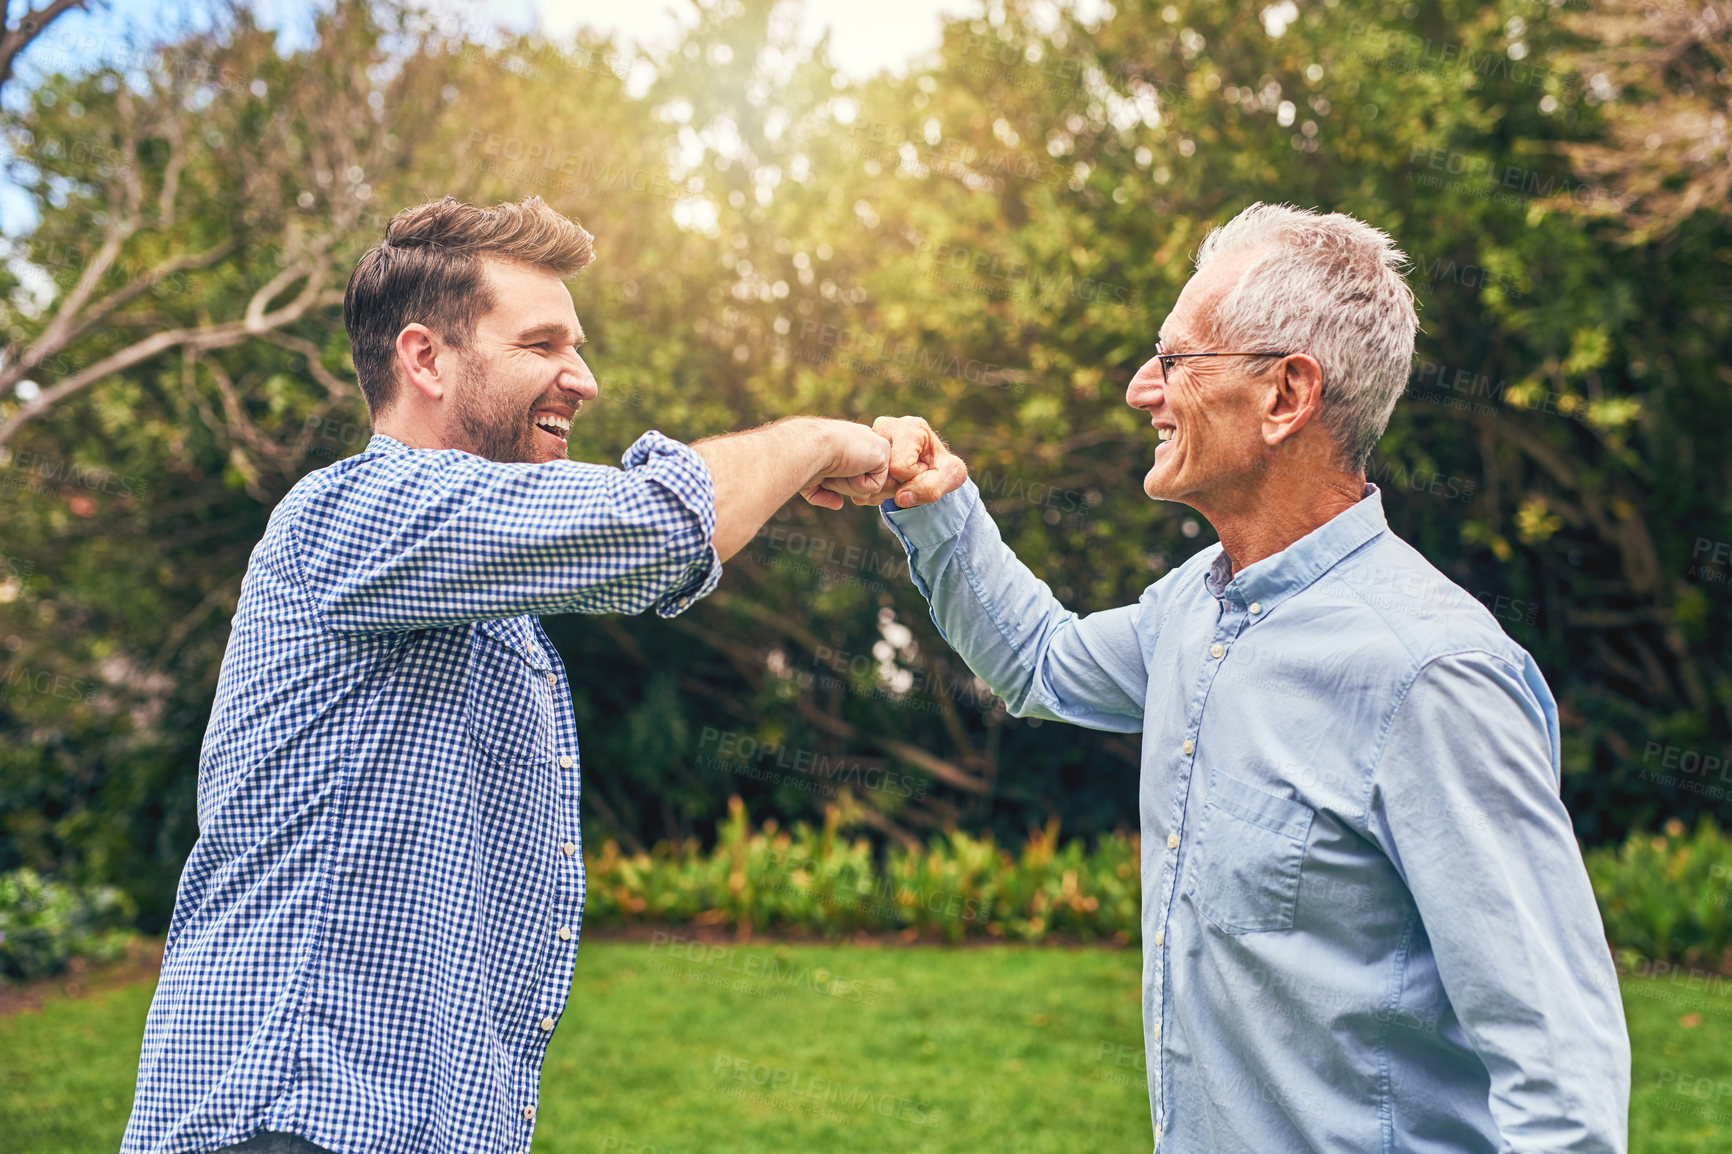 Buy stock photo Shot of a senior father and his adult son giving each other a fist pound outside